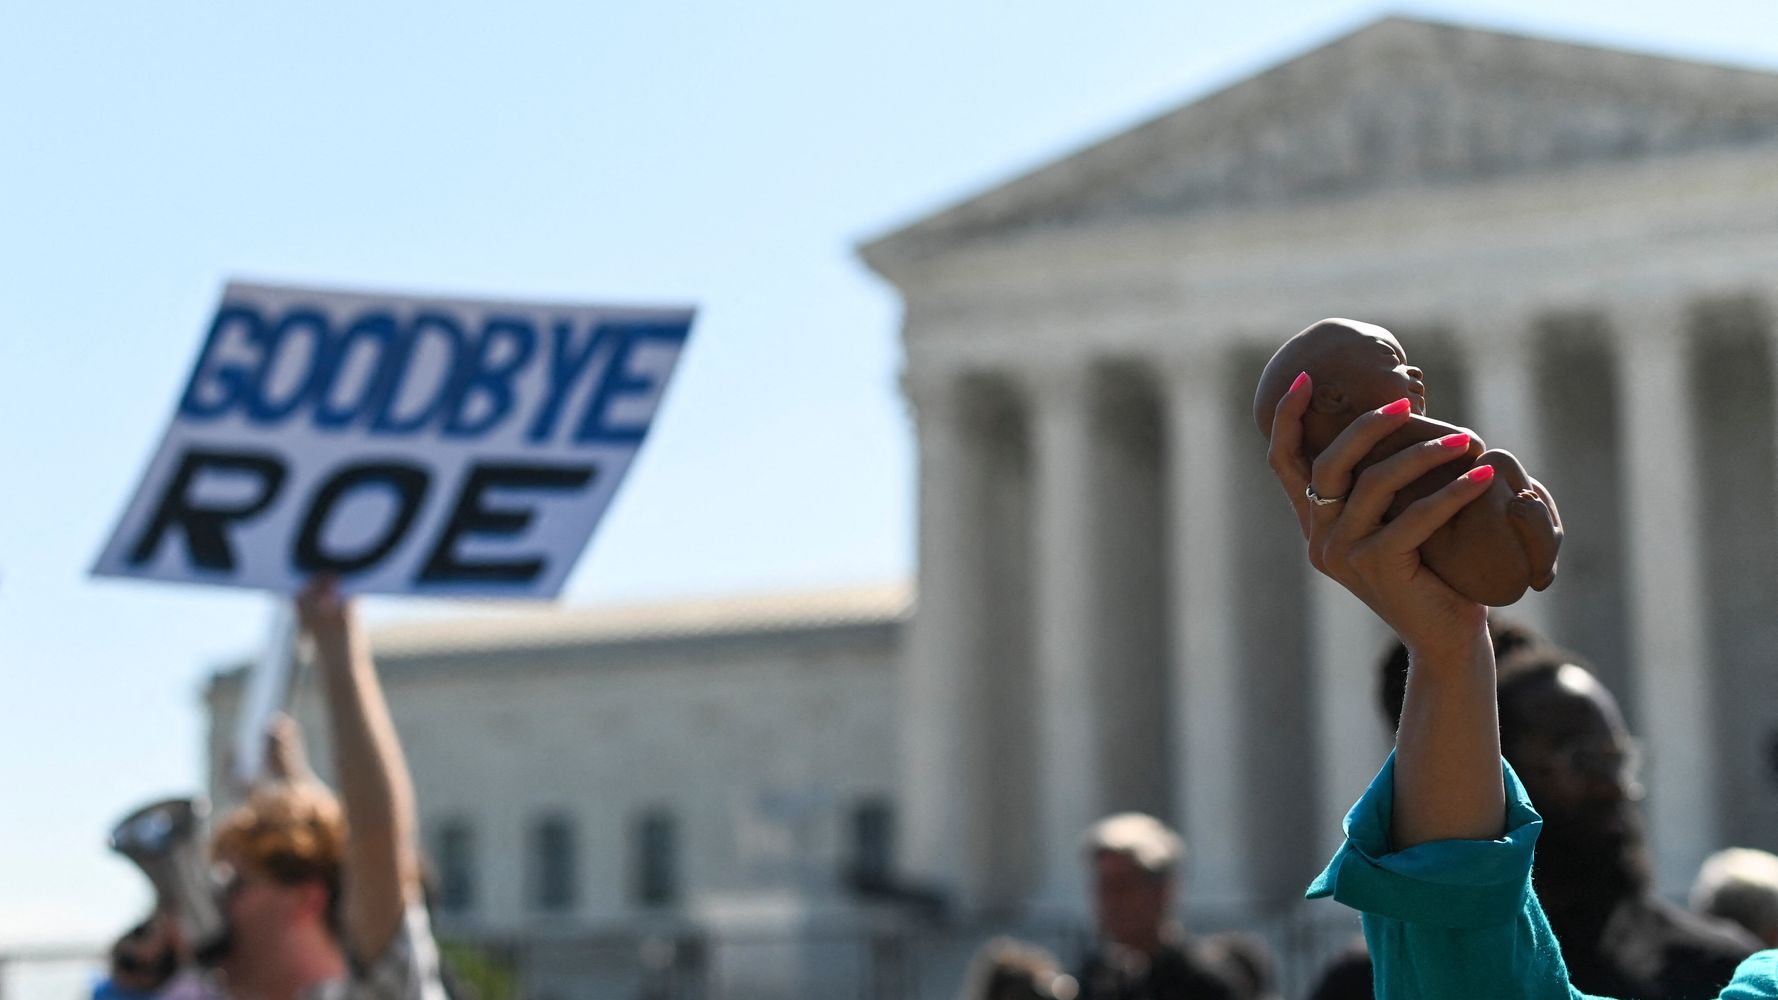 More Than 200 Abortion Clinics Will Close If The Supreme Court Overturns Roe